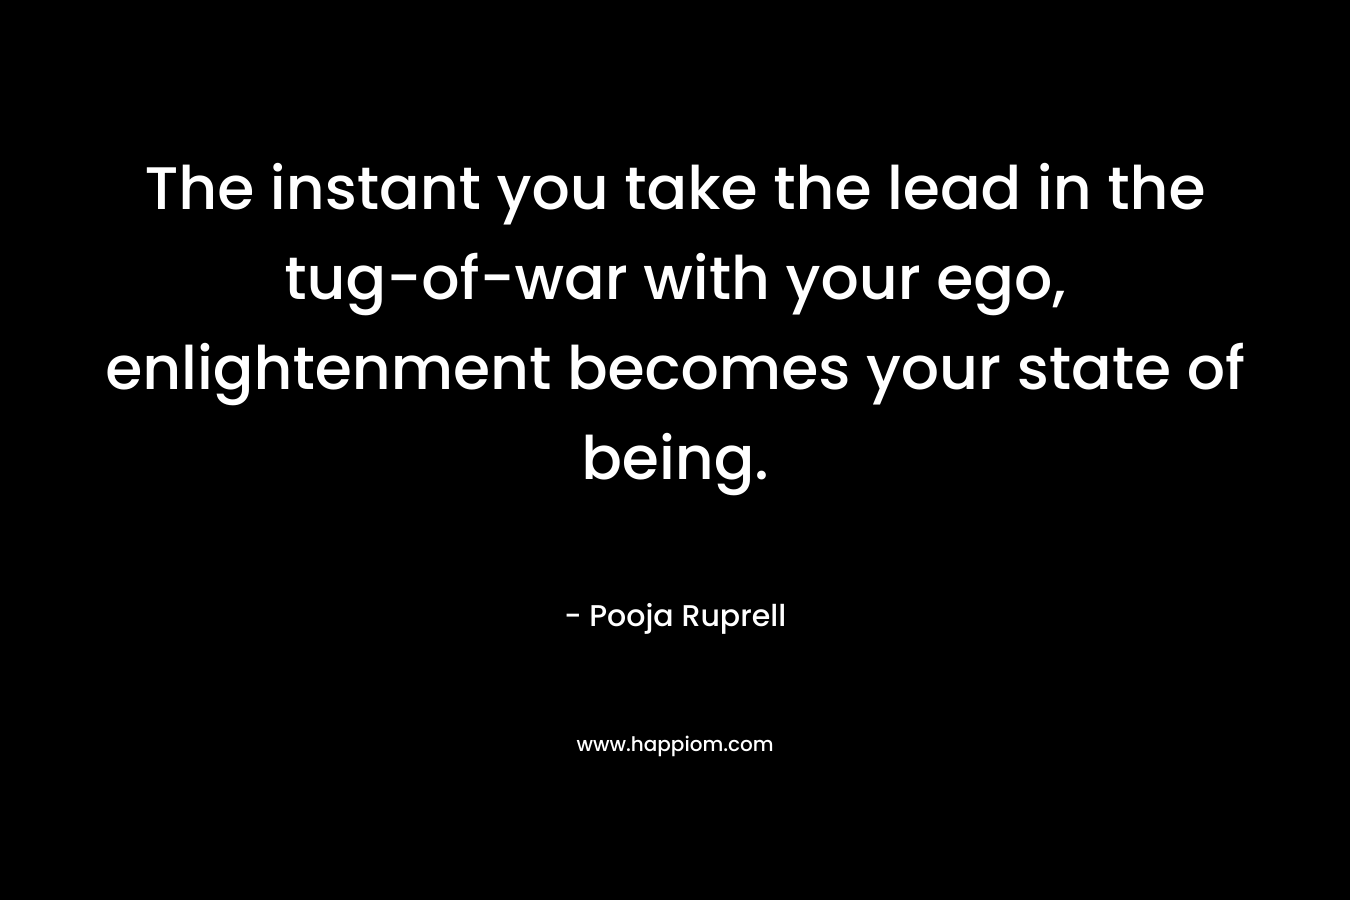 The instant you take the lead in the tug-of-war with your ego, enlightenment becomes your state of being. – Pooja Ruprell